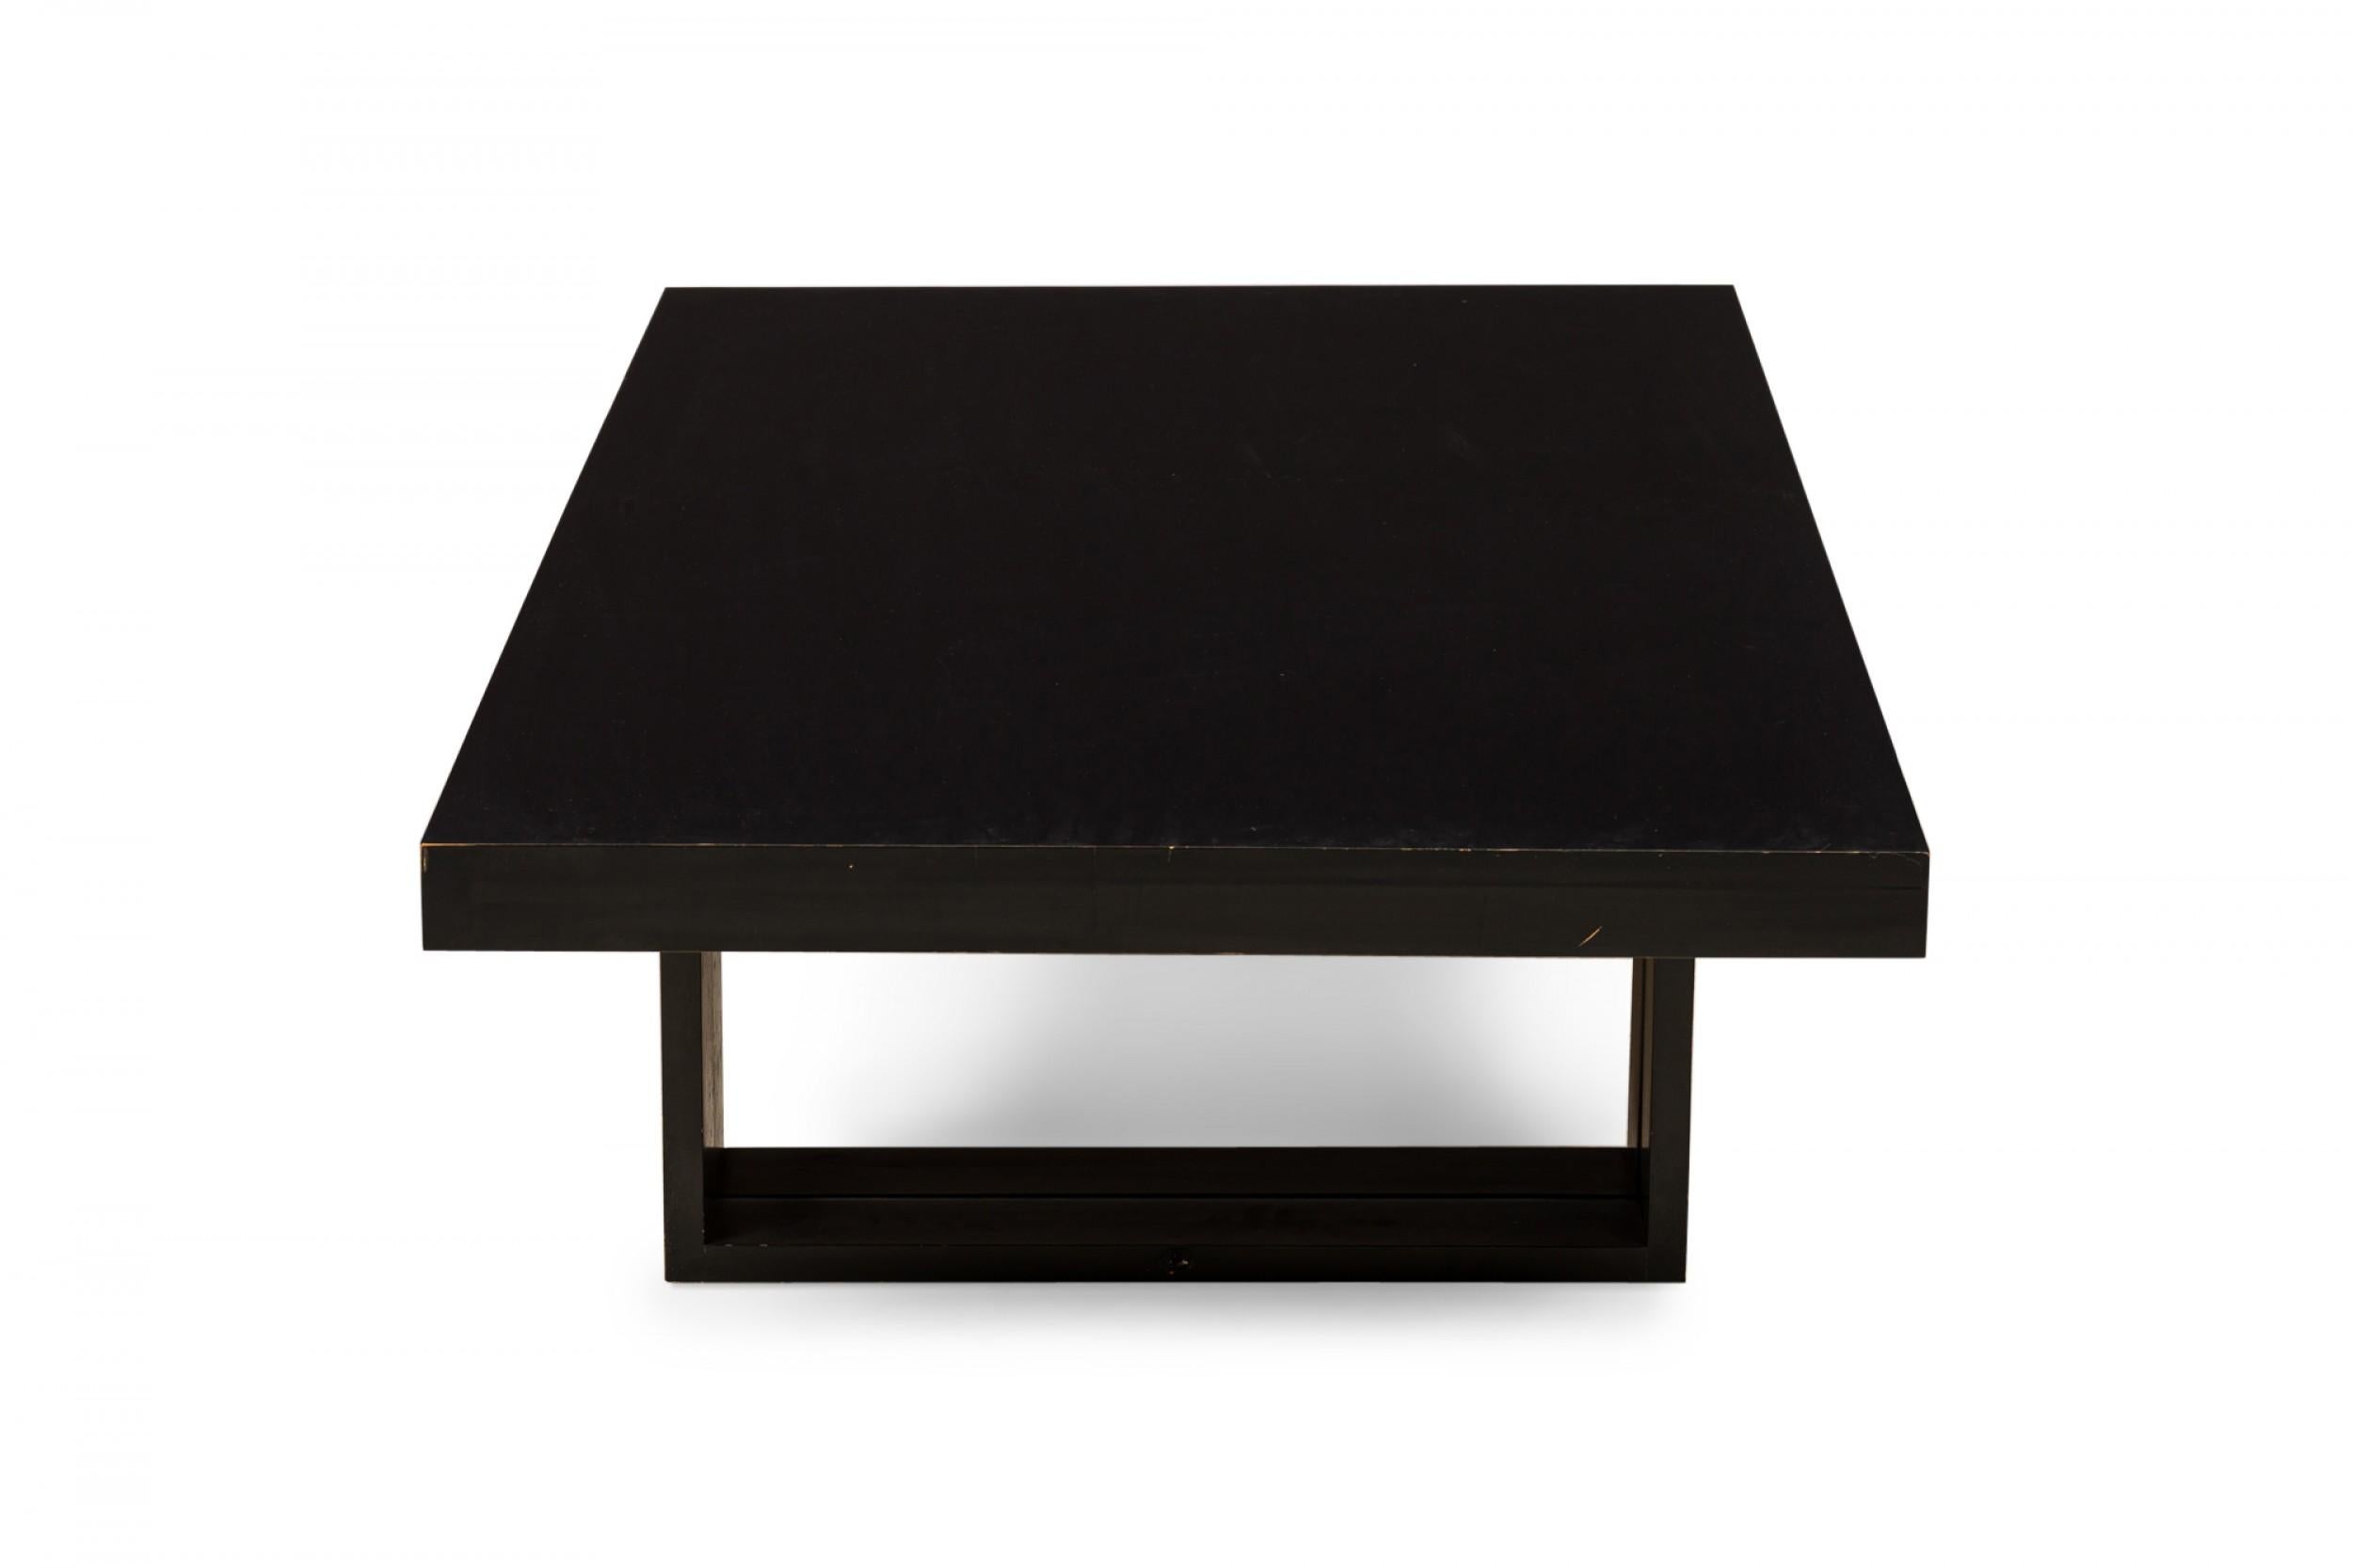 American Mid-Century rectangular ebonized wooden 'Camel' coffee / cocktail table resting on two sets of bracket-shaped legs that raise to convert to a dining table. (VAN KEPPEL GREEN, VKG)
